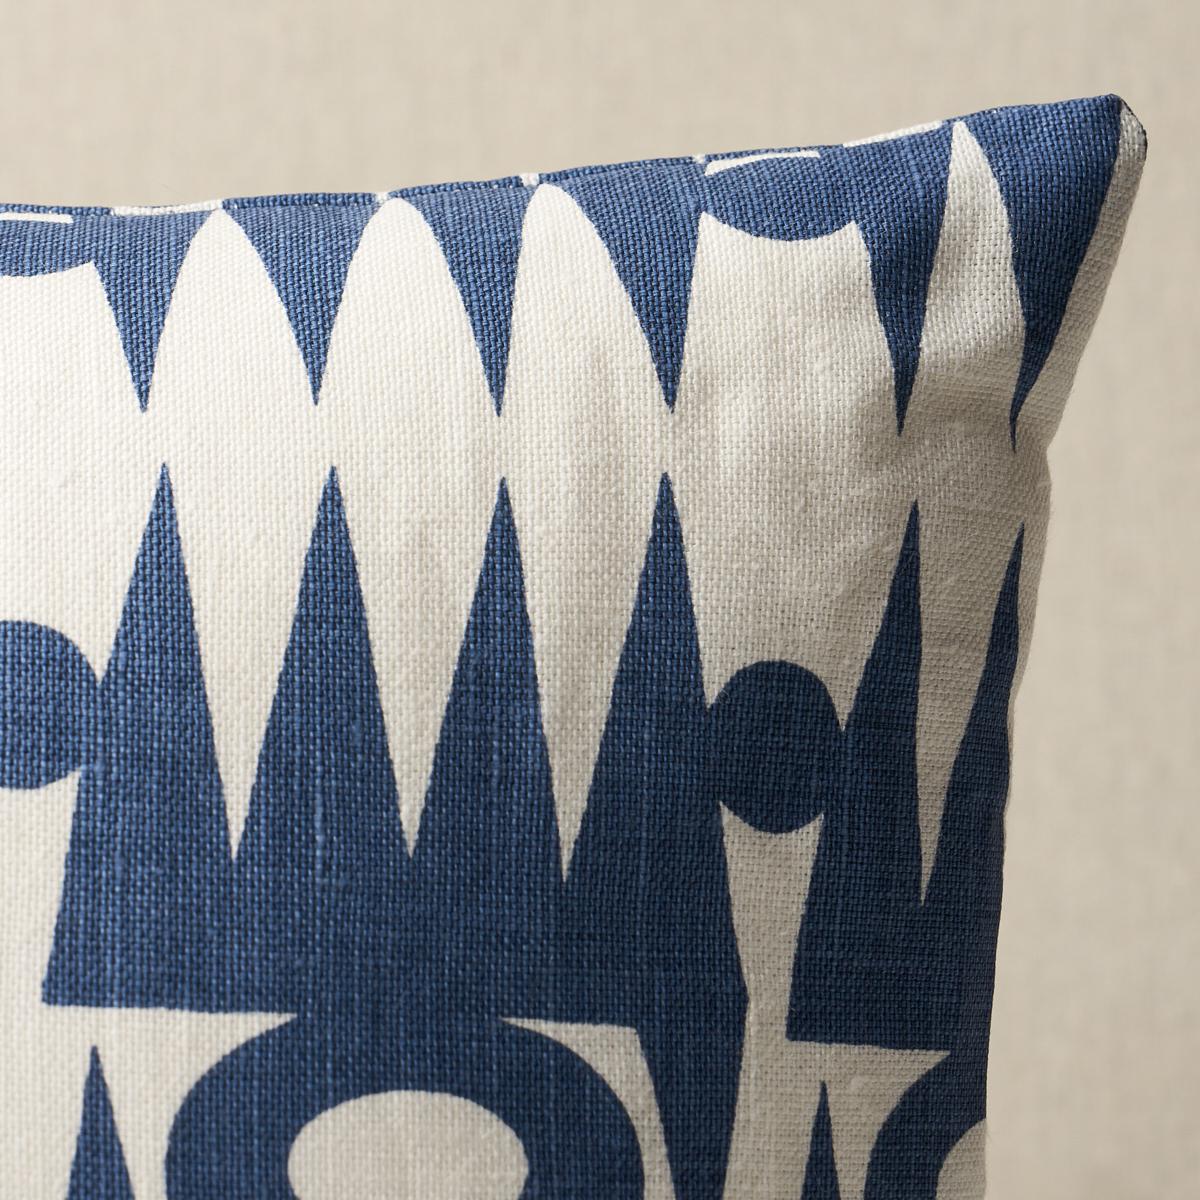 This pillow features Ra by Drusus Tabor with a knife edge finish. Created in collaboration with Drusus Tabor and named for the Egyptian sun god, Ra is a dynamic geometric design that creates a vertical stripe effect. Pillow includes a feather/down